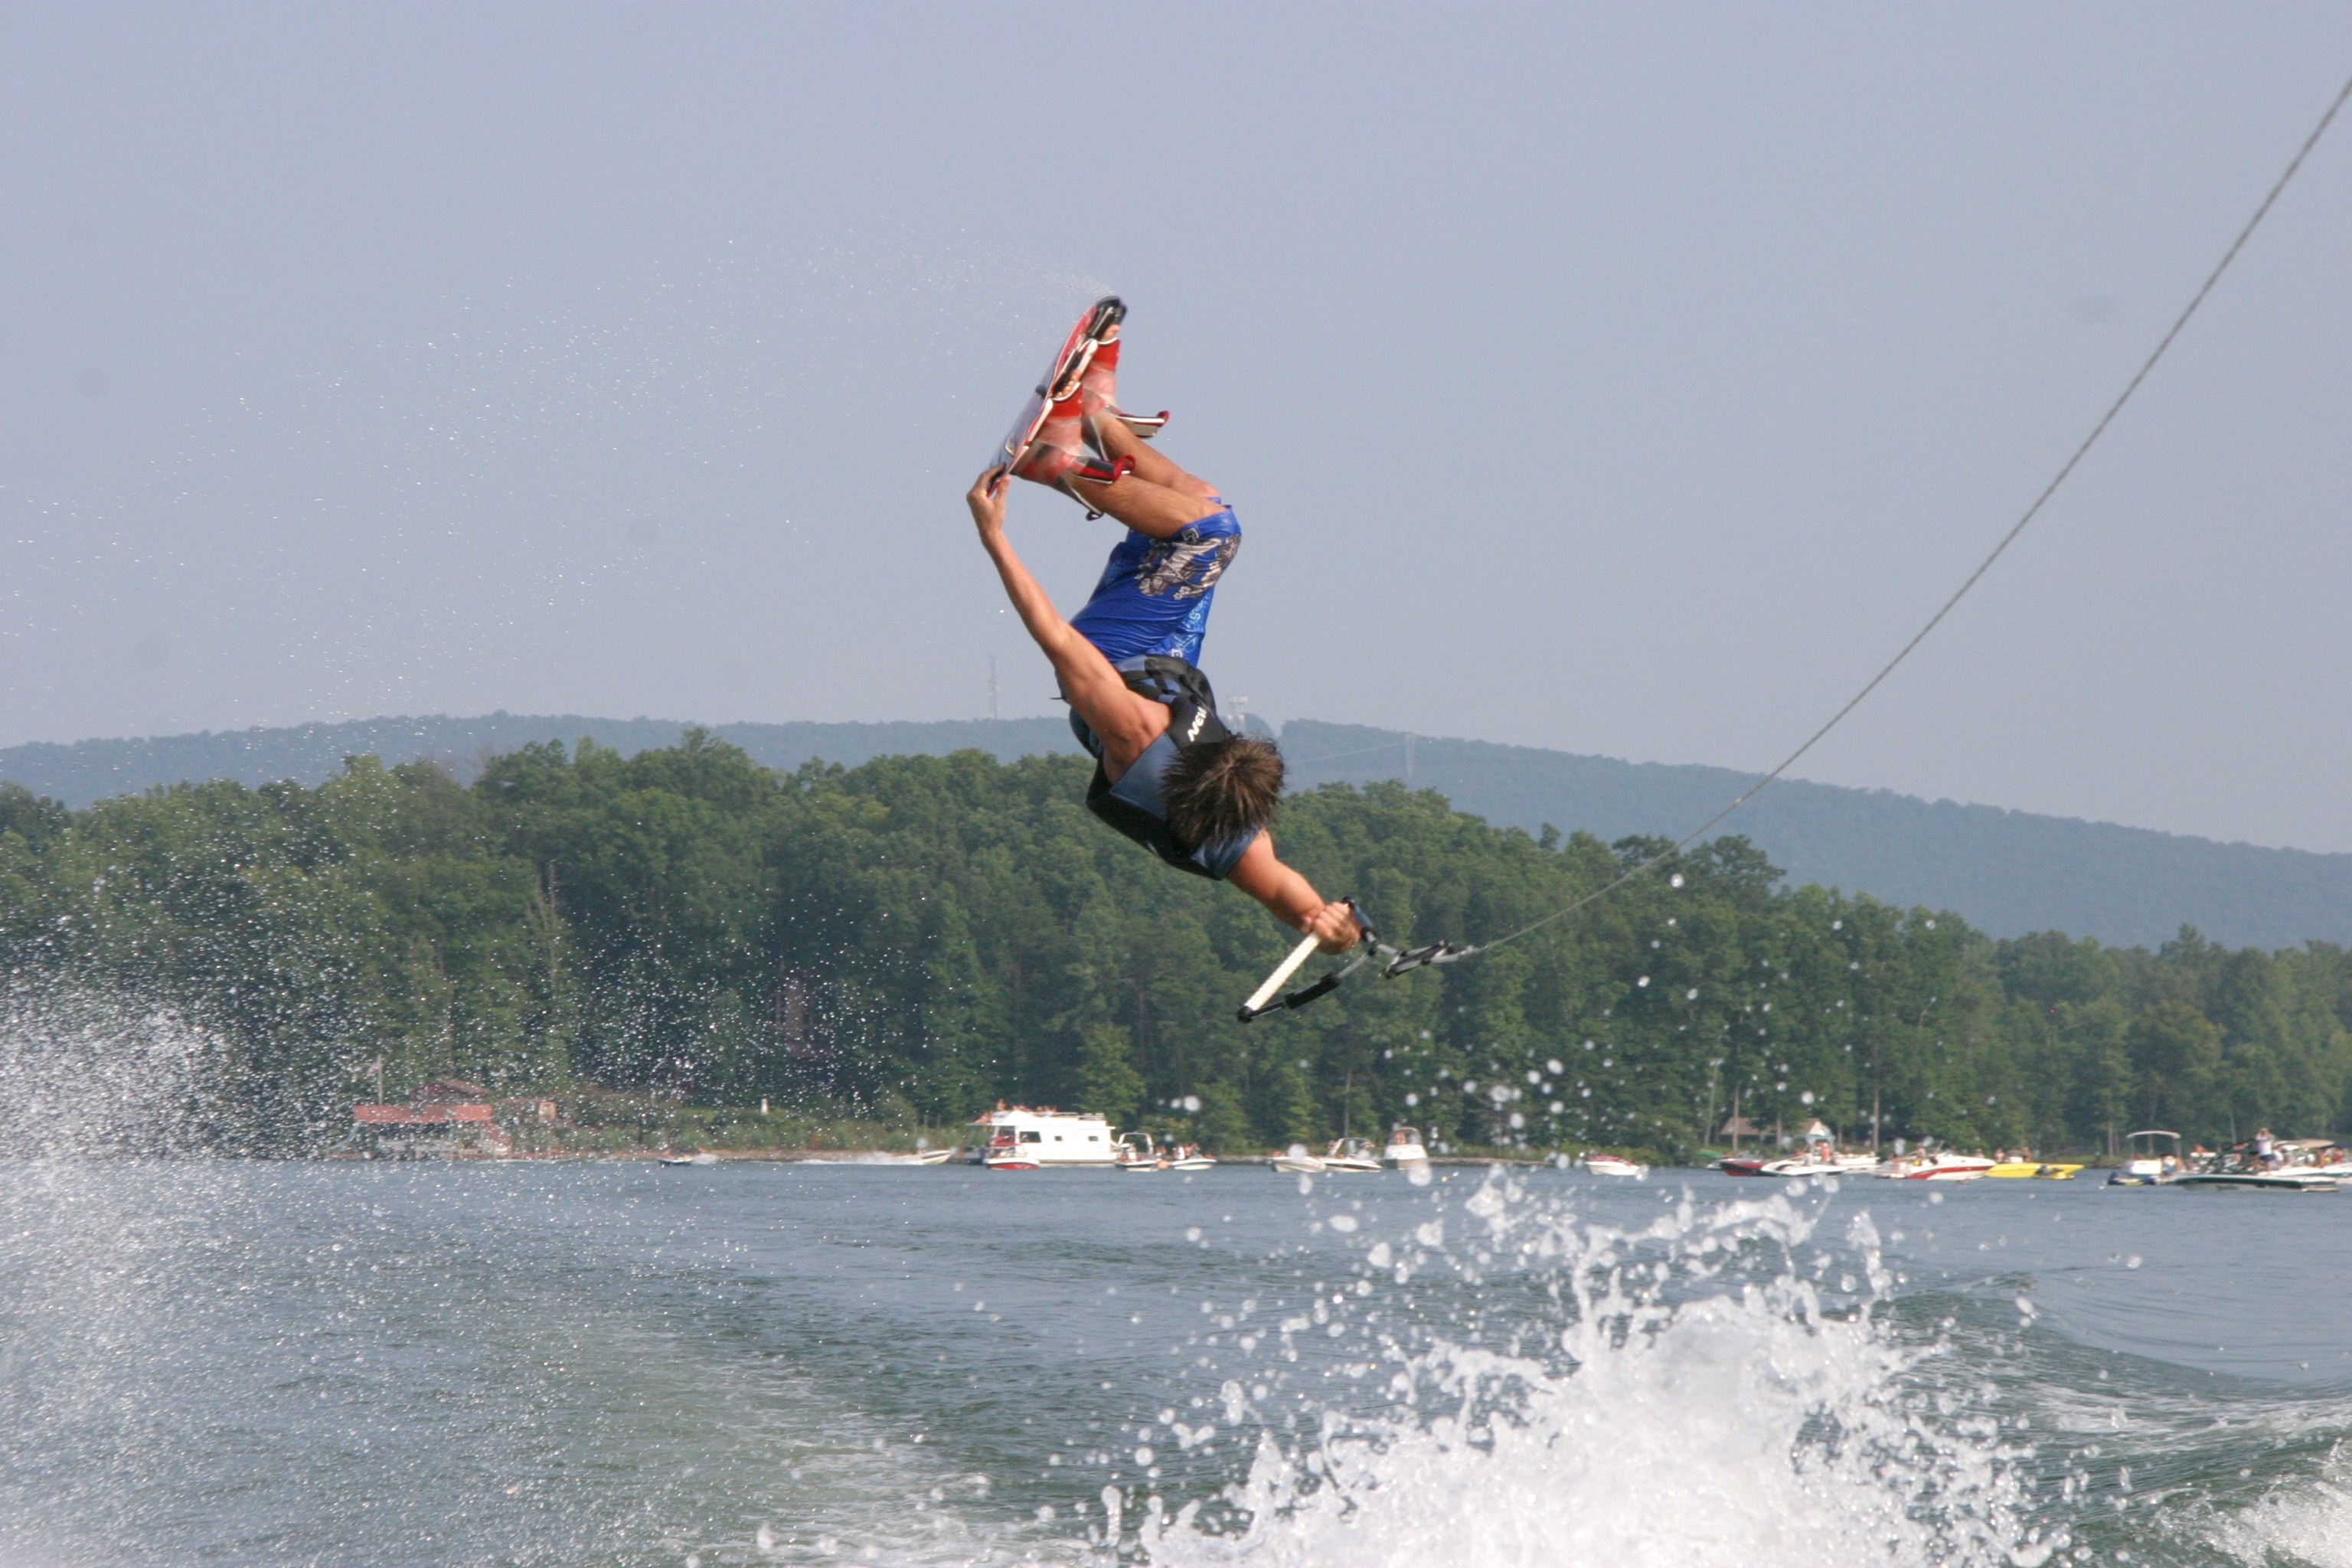 Wakeboarding: Riding a surfboard towed behind a motorboat, Backflip in the air by a stuntman. 3080x2050 HD Background.